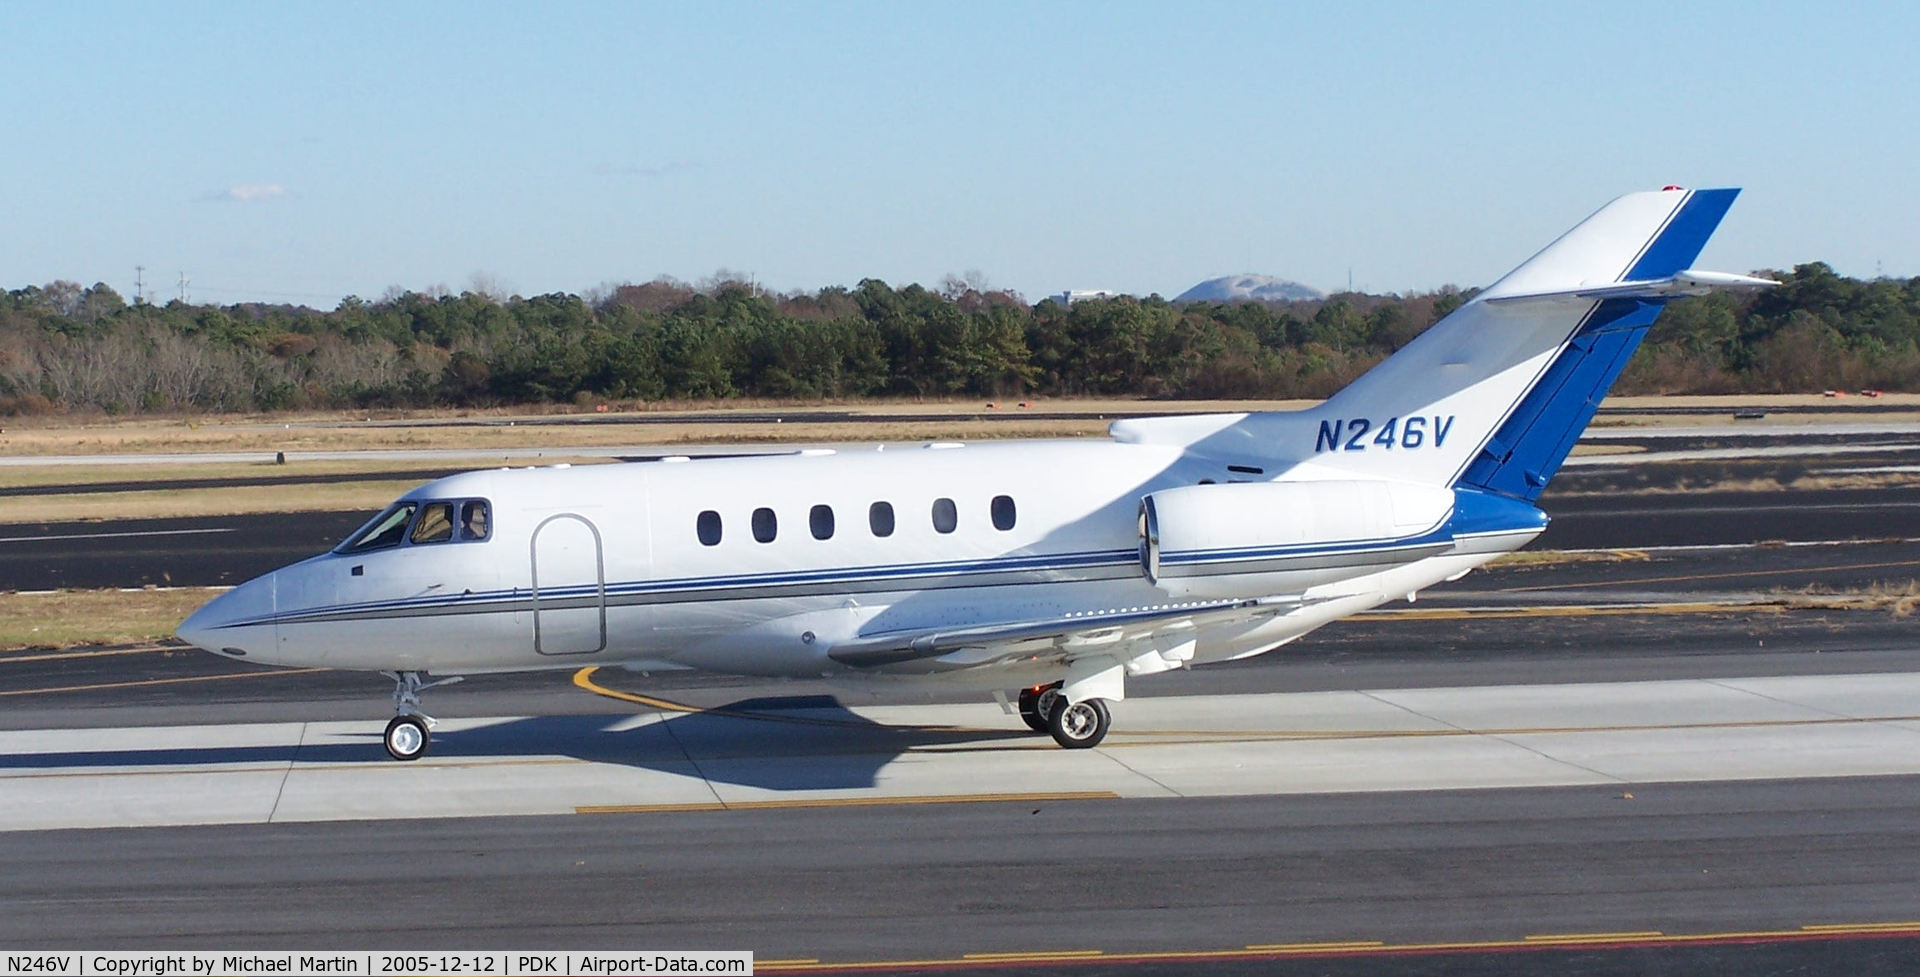 N246V, 1999 Raytheon Hawker 800XP C/N 258417, Arriving PDK taxing to tie down